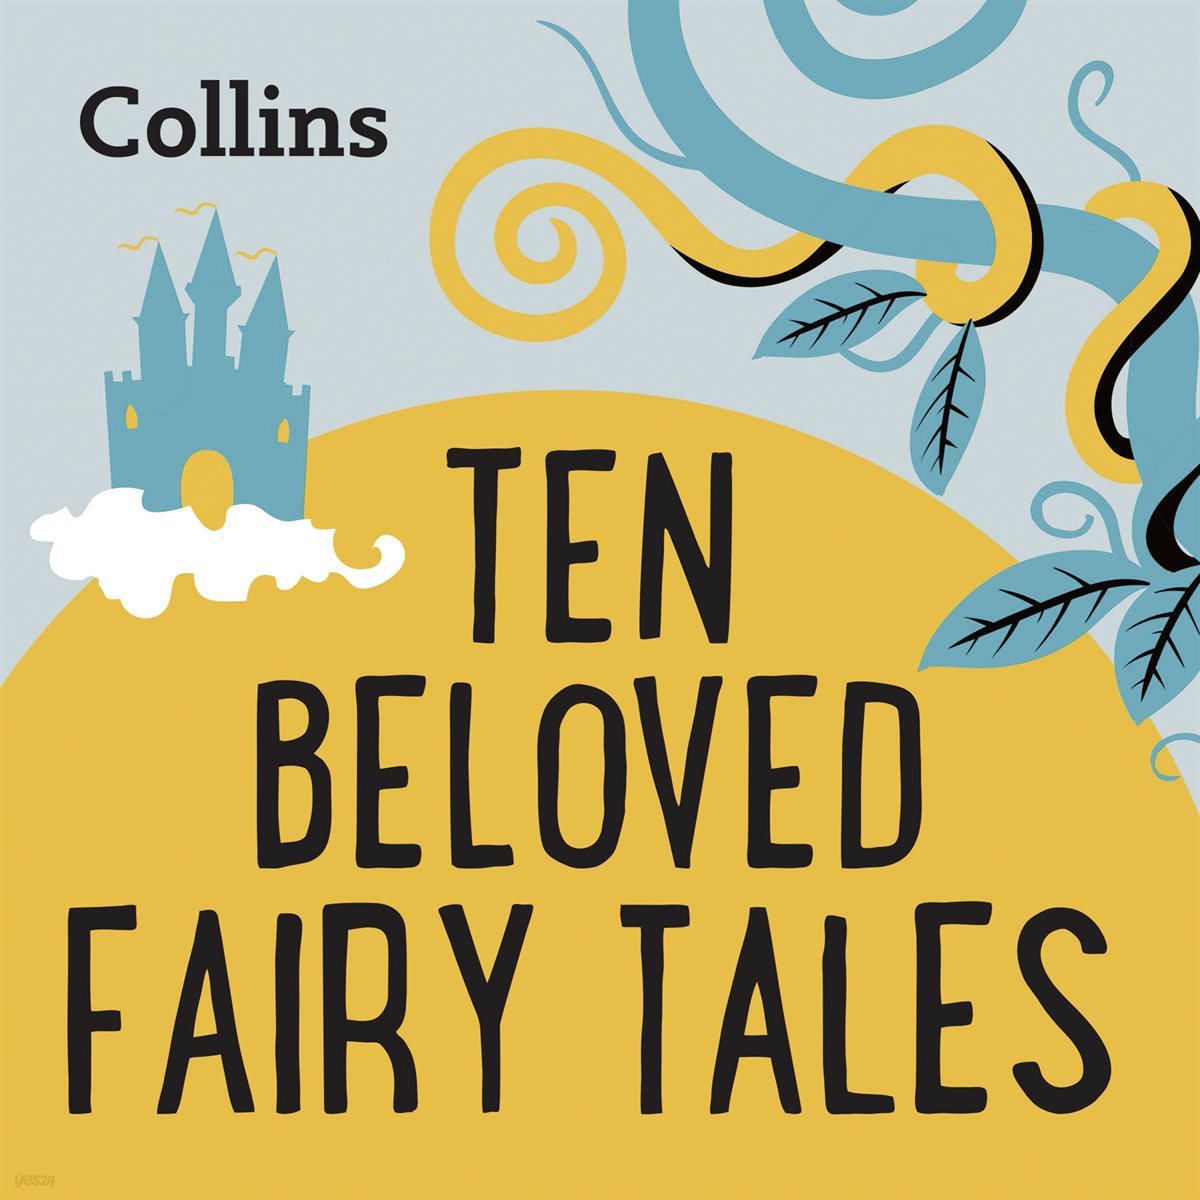 [US Eng] TEN BELOVED FAIRY-TALES: For ages 7-11 -Collins